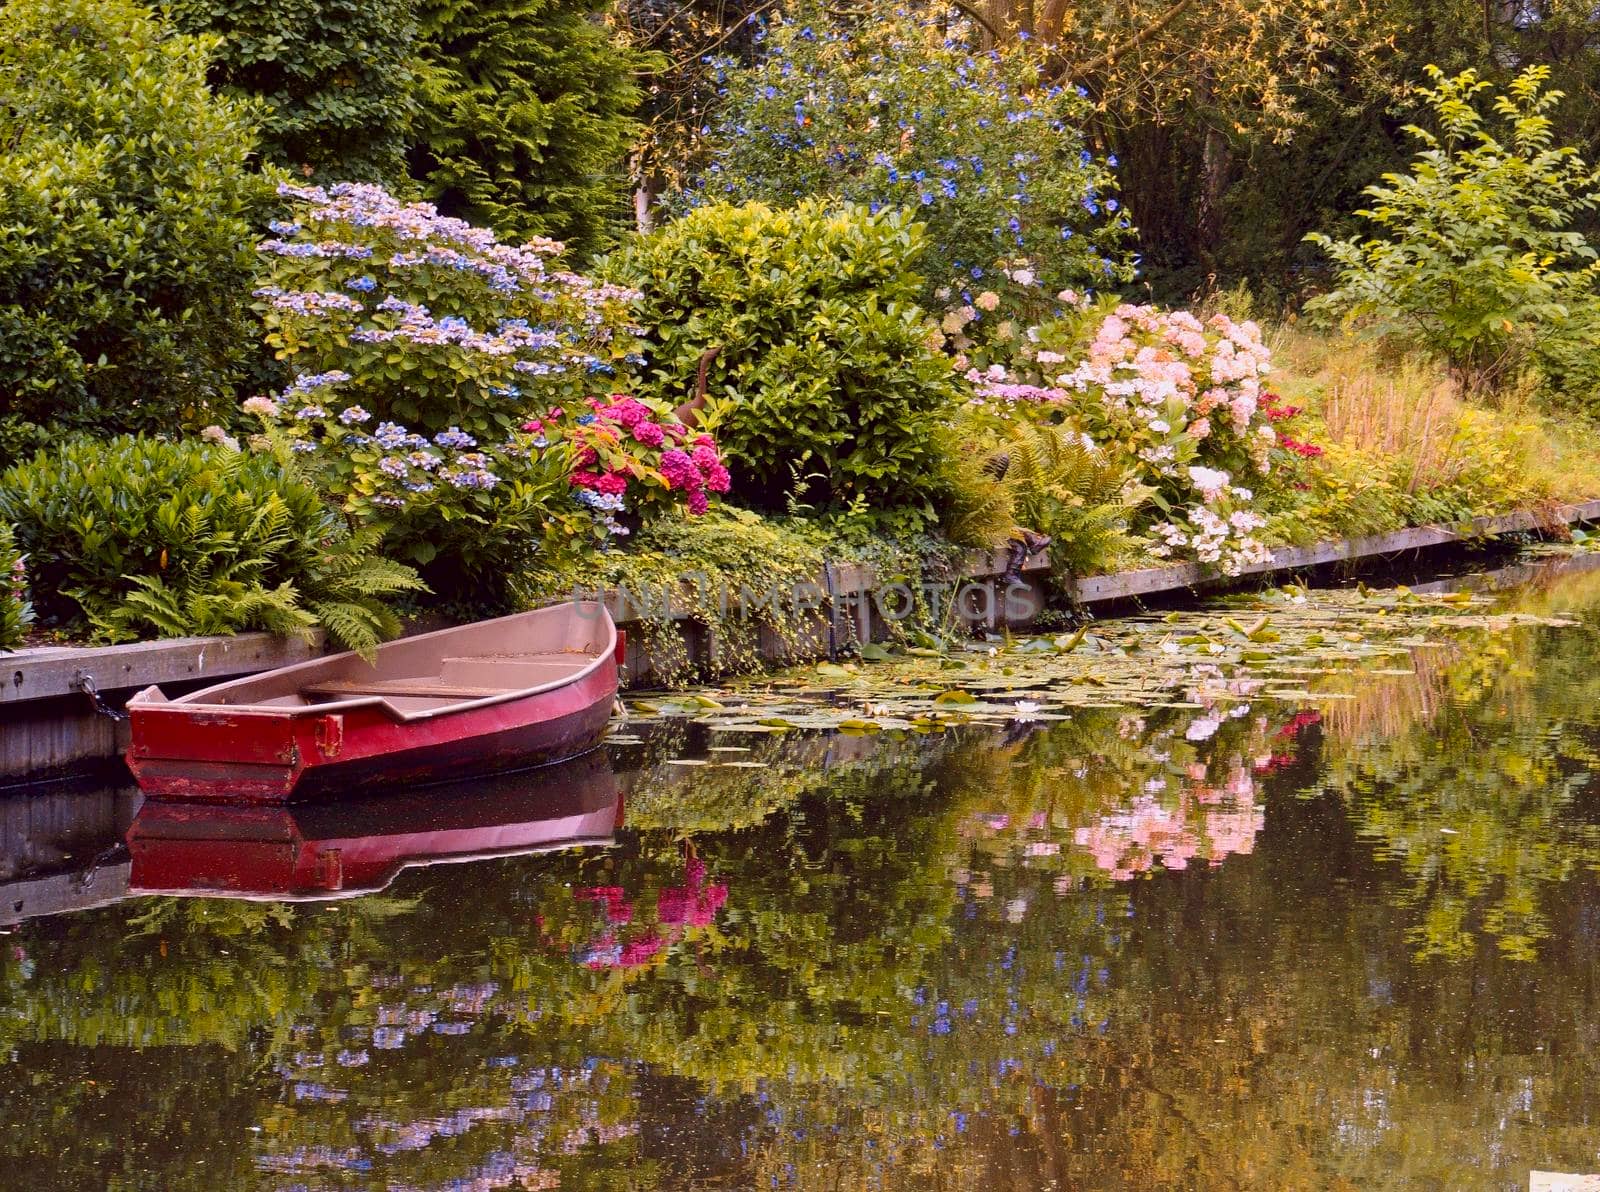 A lovely garden and a boat reflected in a river by WielandTeixeira